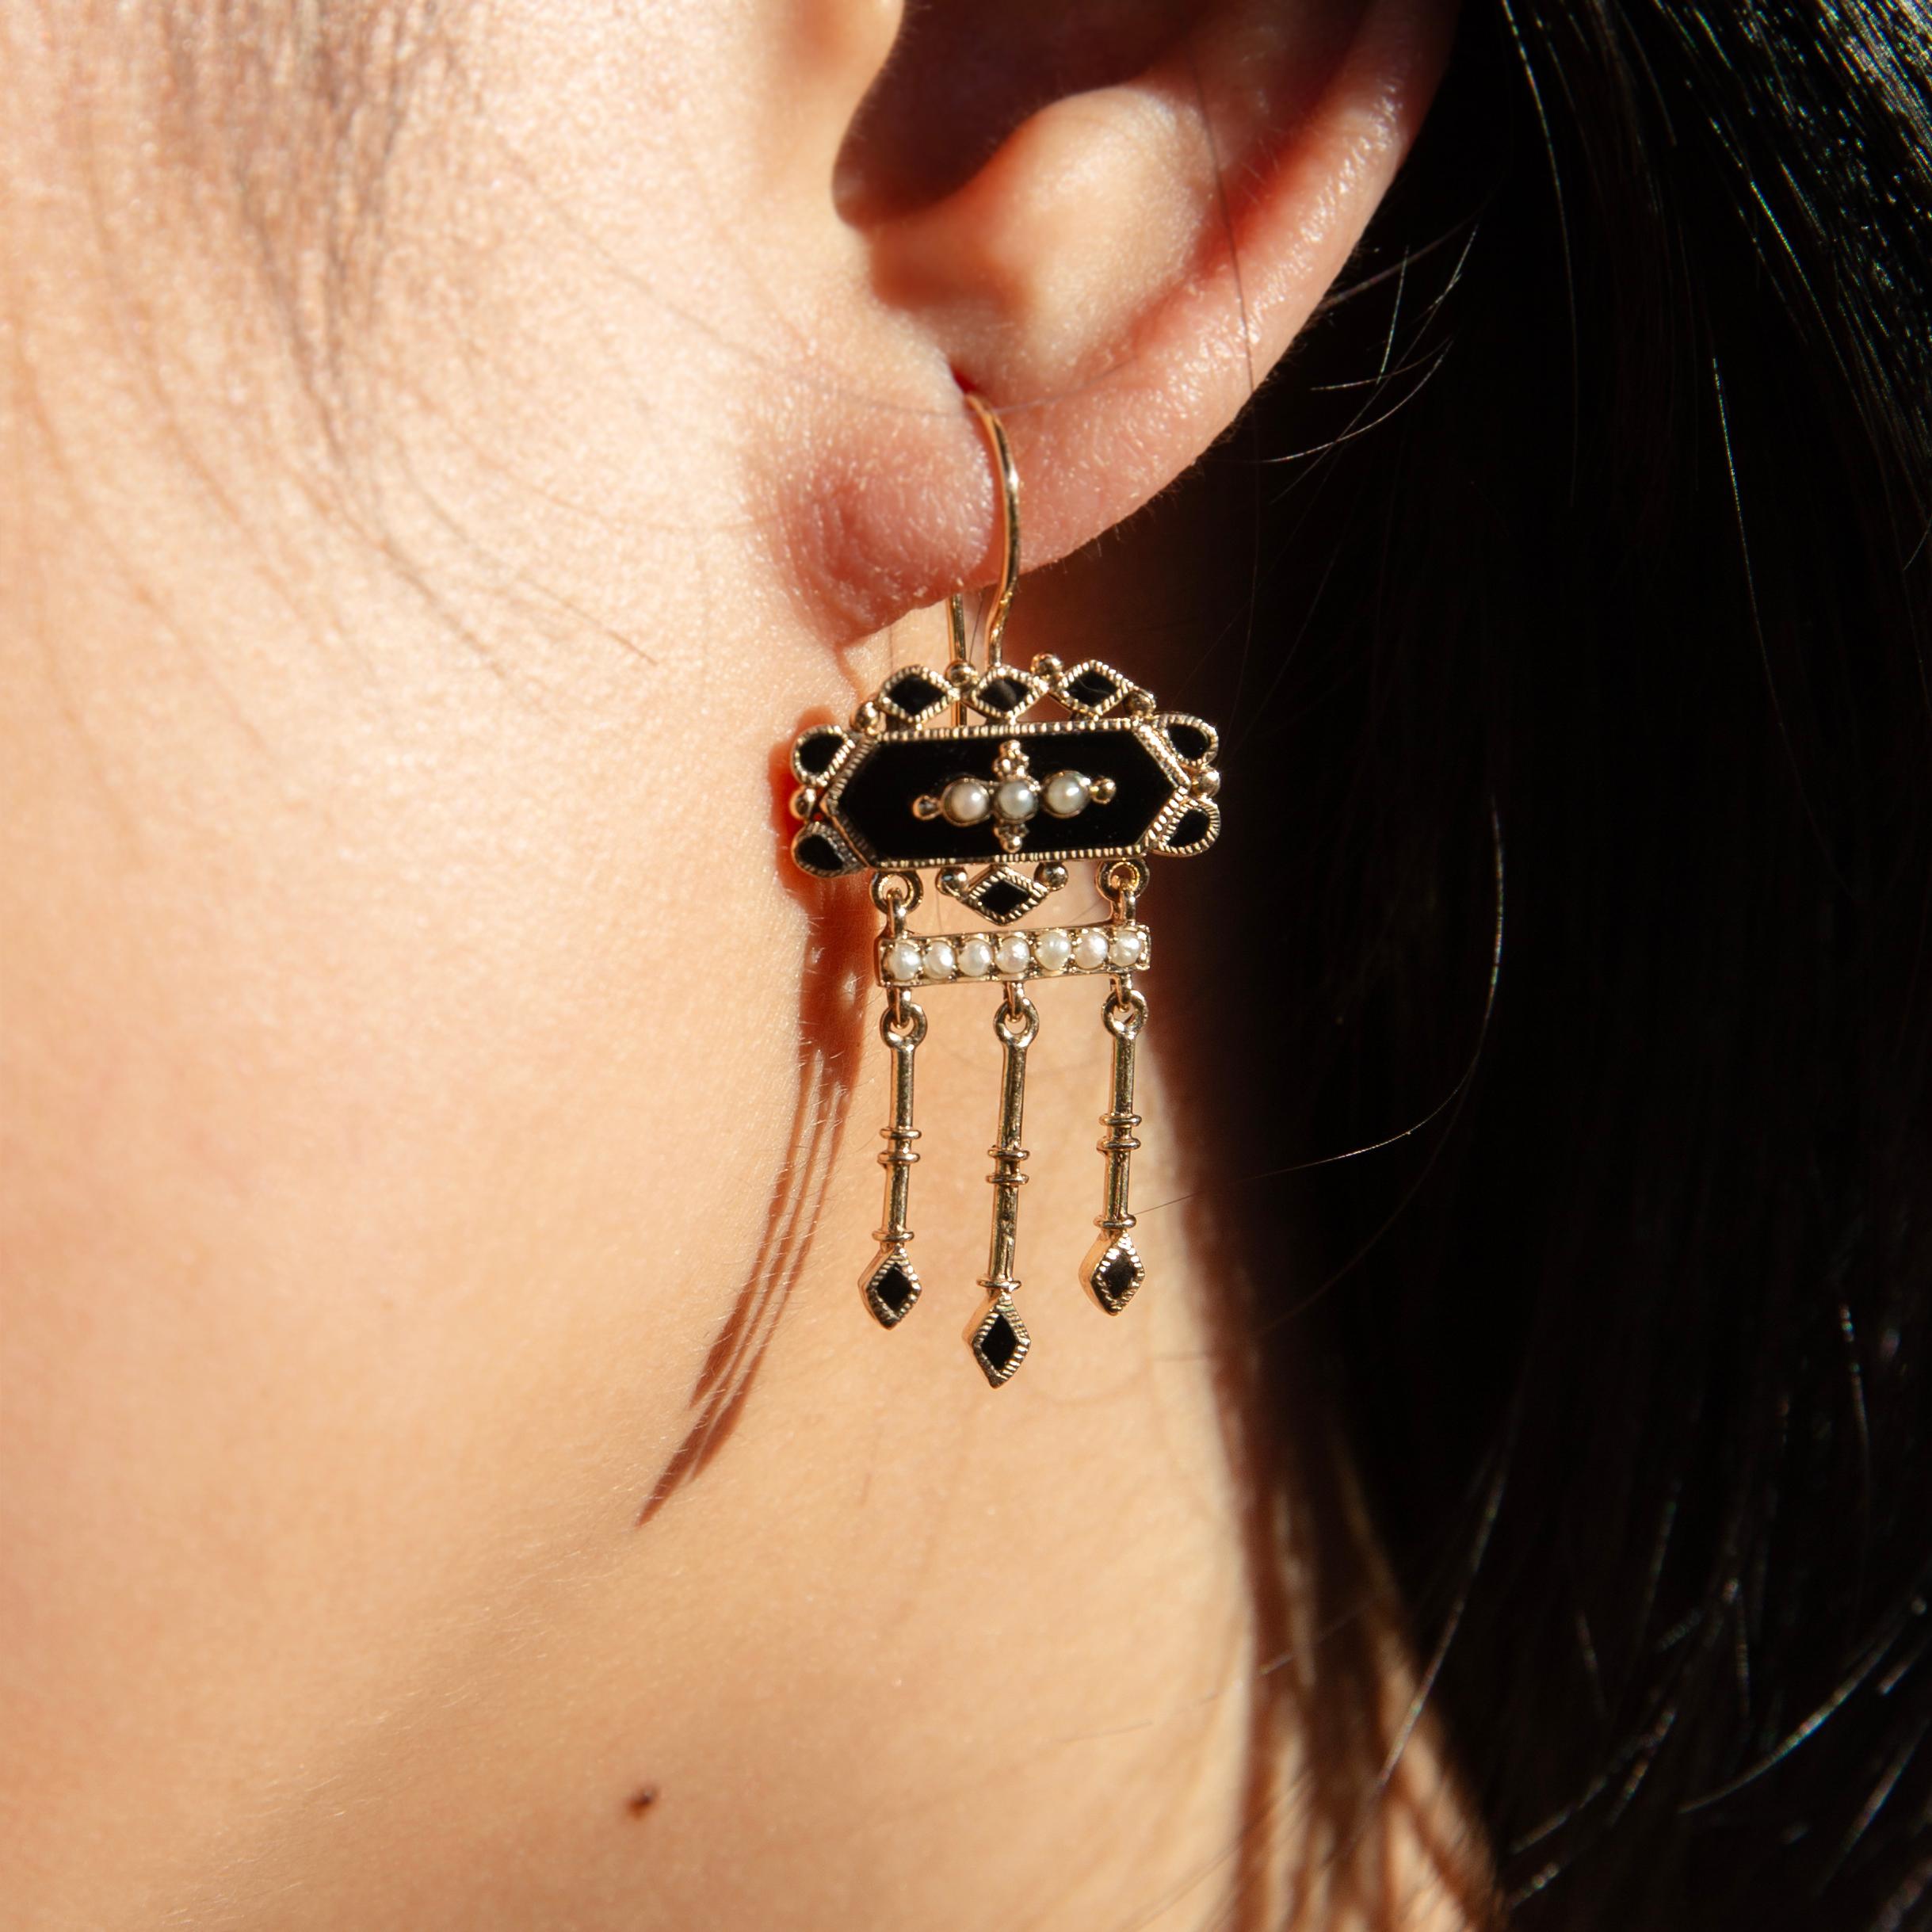 Bold and opulent, The Winifred Earrings are a stunning showpiece. Her chandeliers of cascading gold embellished with jet black onyx and creamy seed pearls are designed to steal the limelight. She is the lead in this cinematic masterpiece.

The